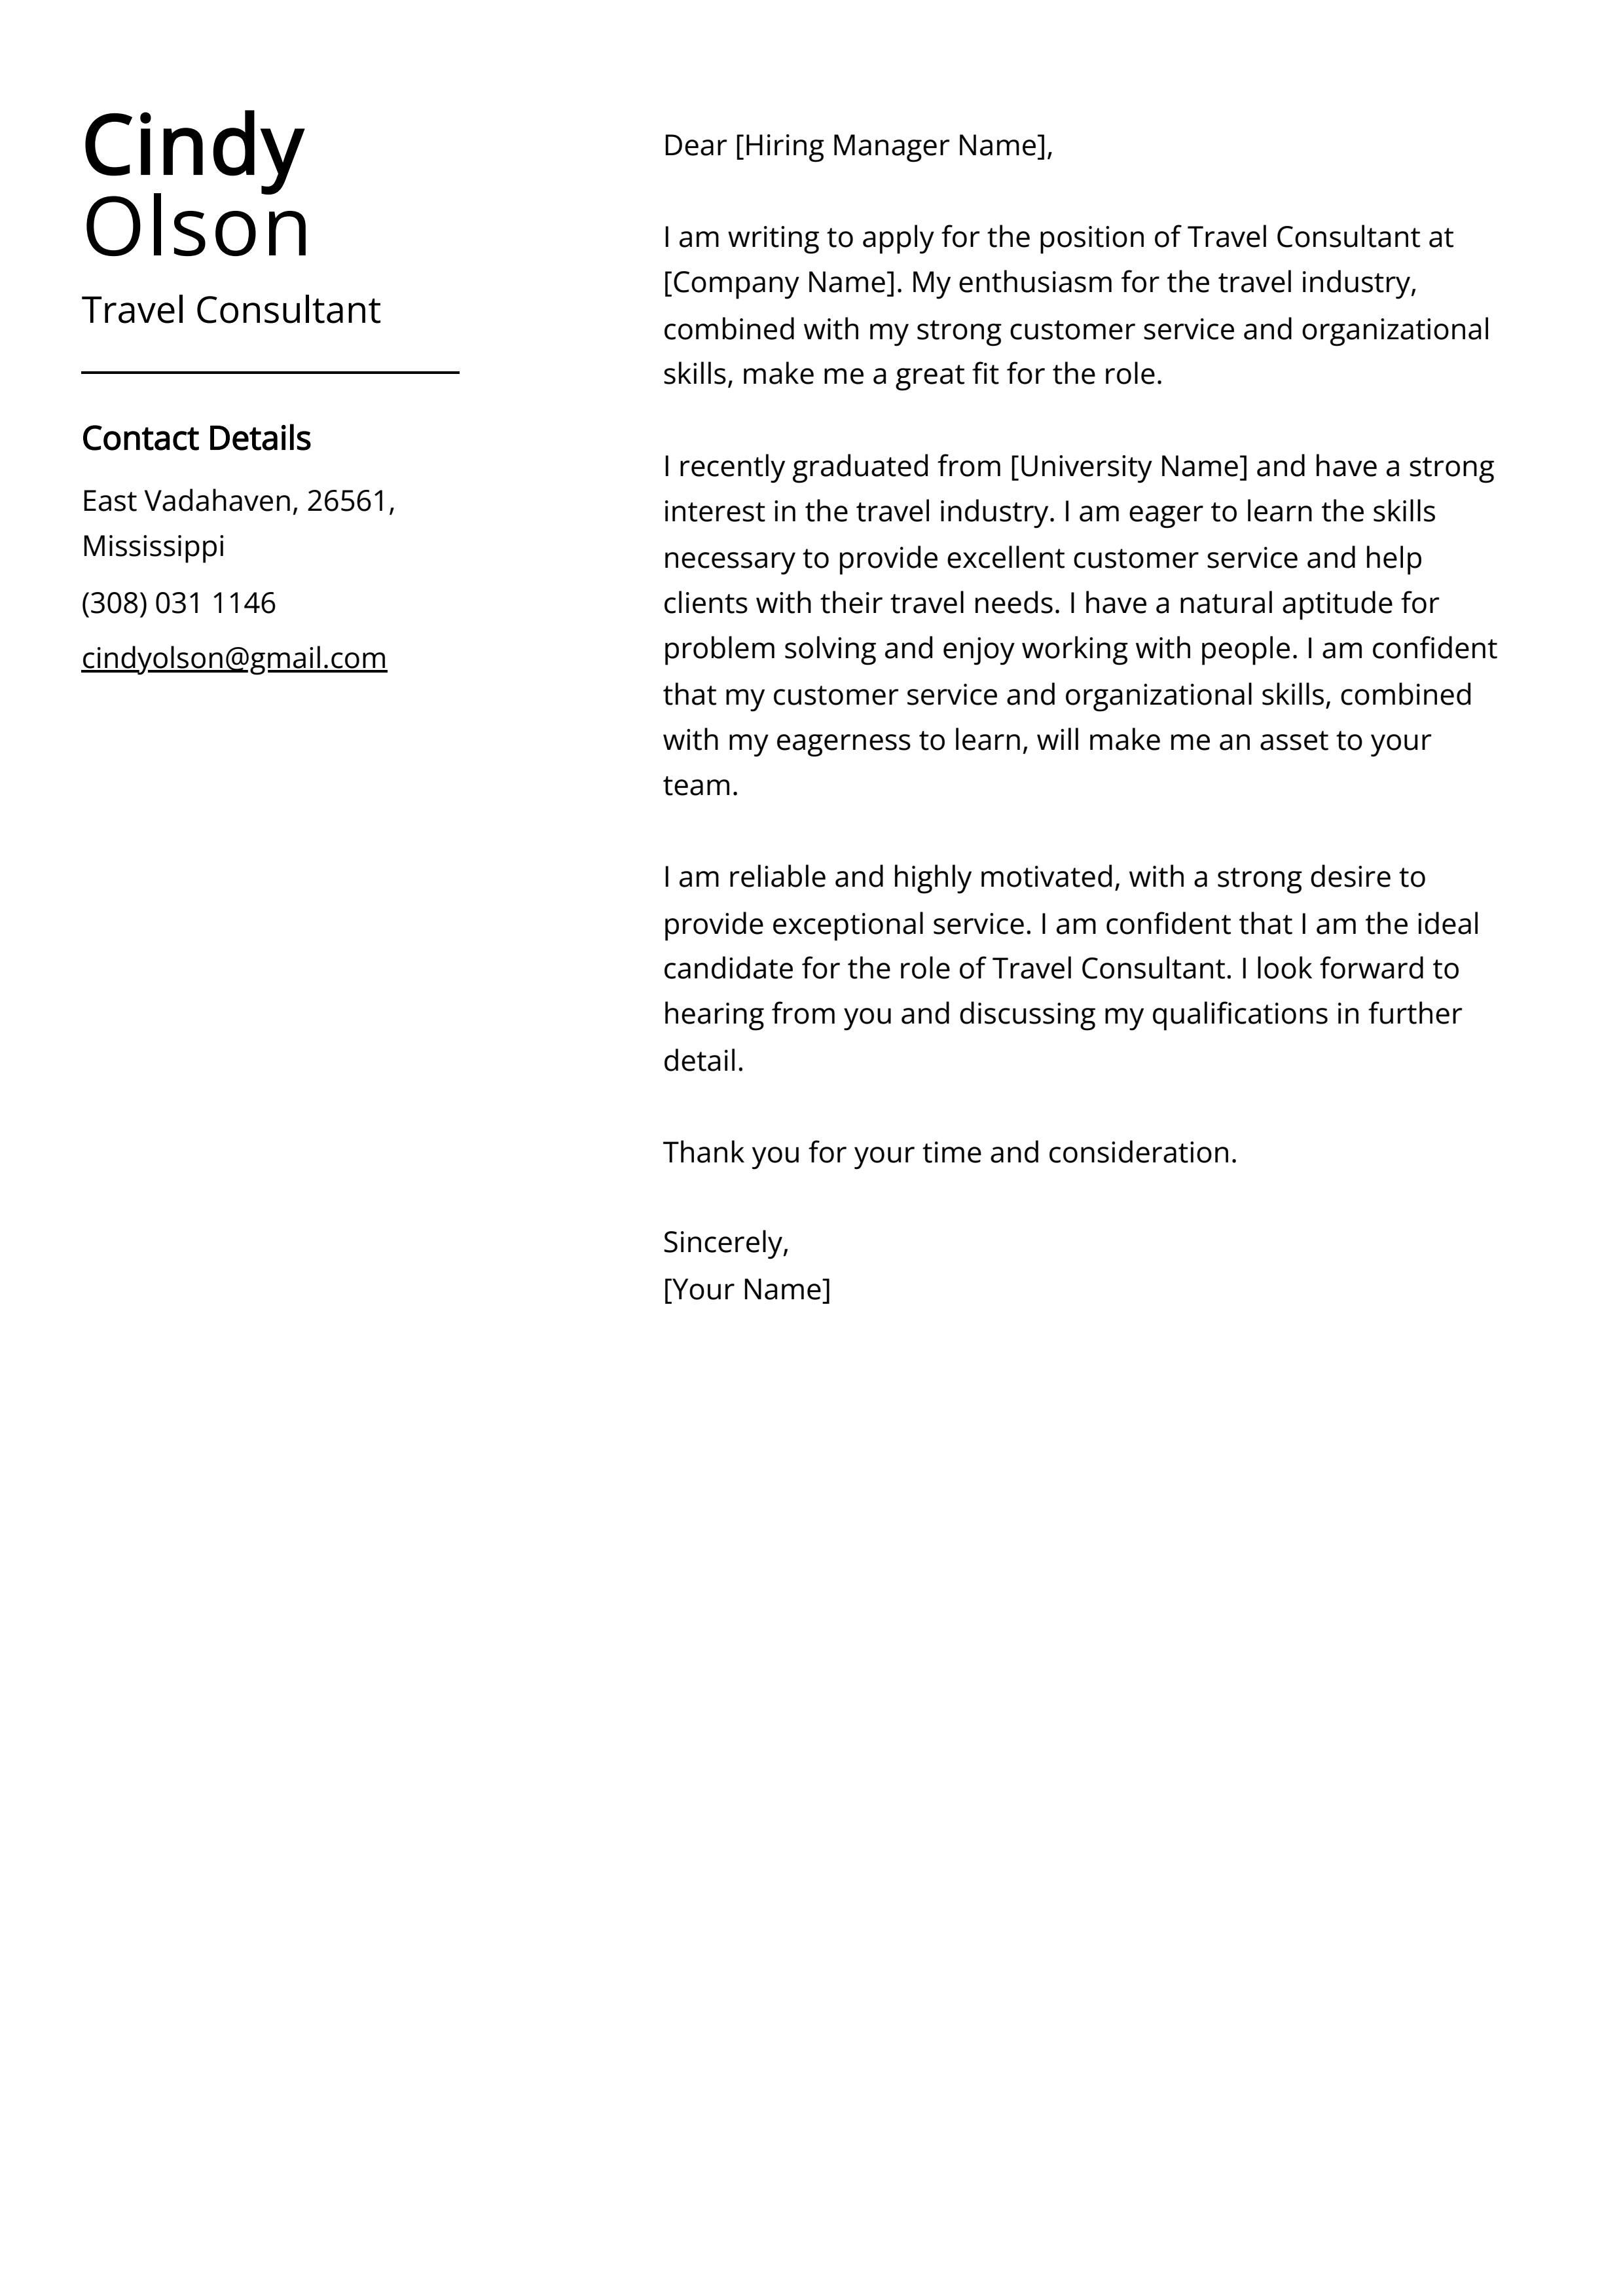 Travel Consultant Cover Letter Example